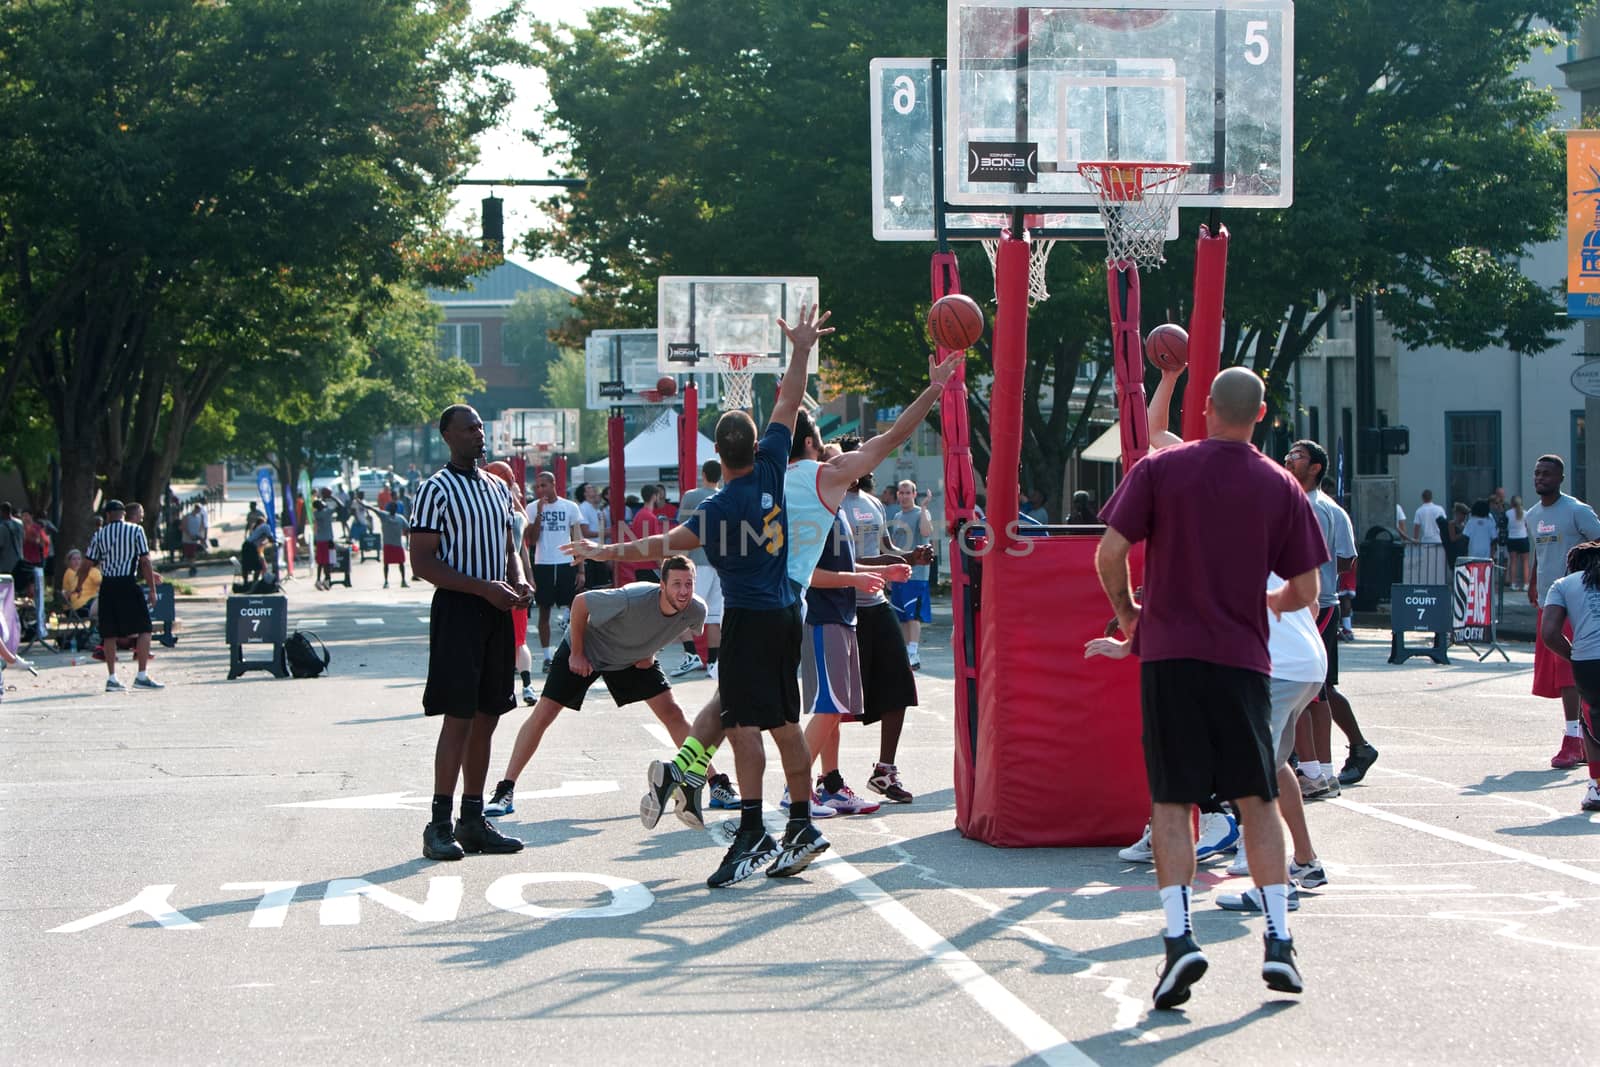 Athens, GA, USA - August 24, 2013:  A man shoots a layup in a 3-on-3 basketball tournament held on the streets of downtown Athens.